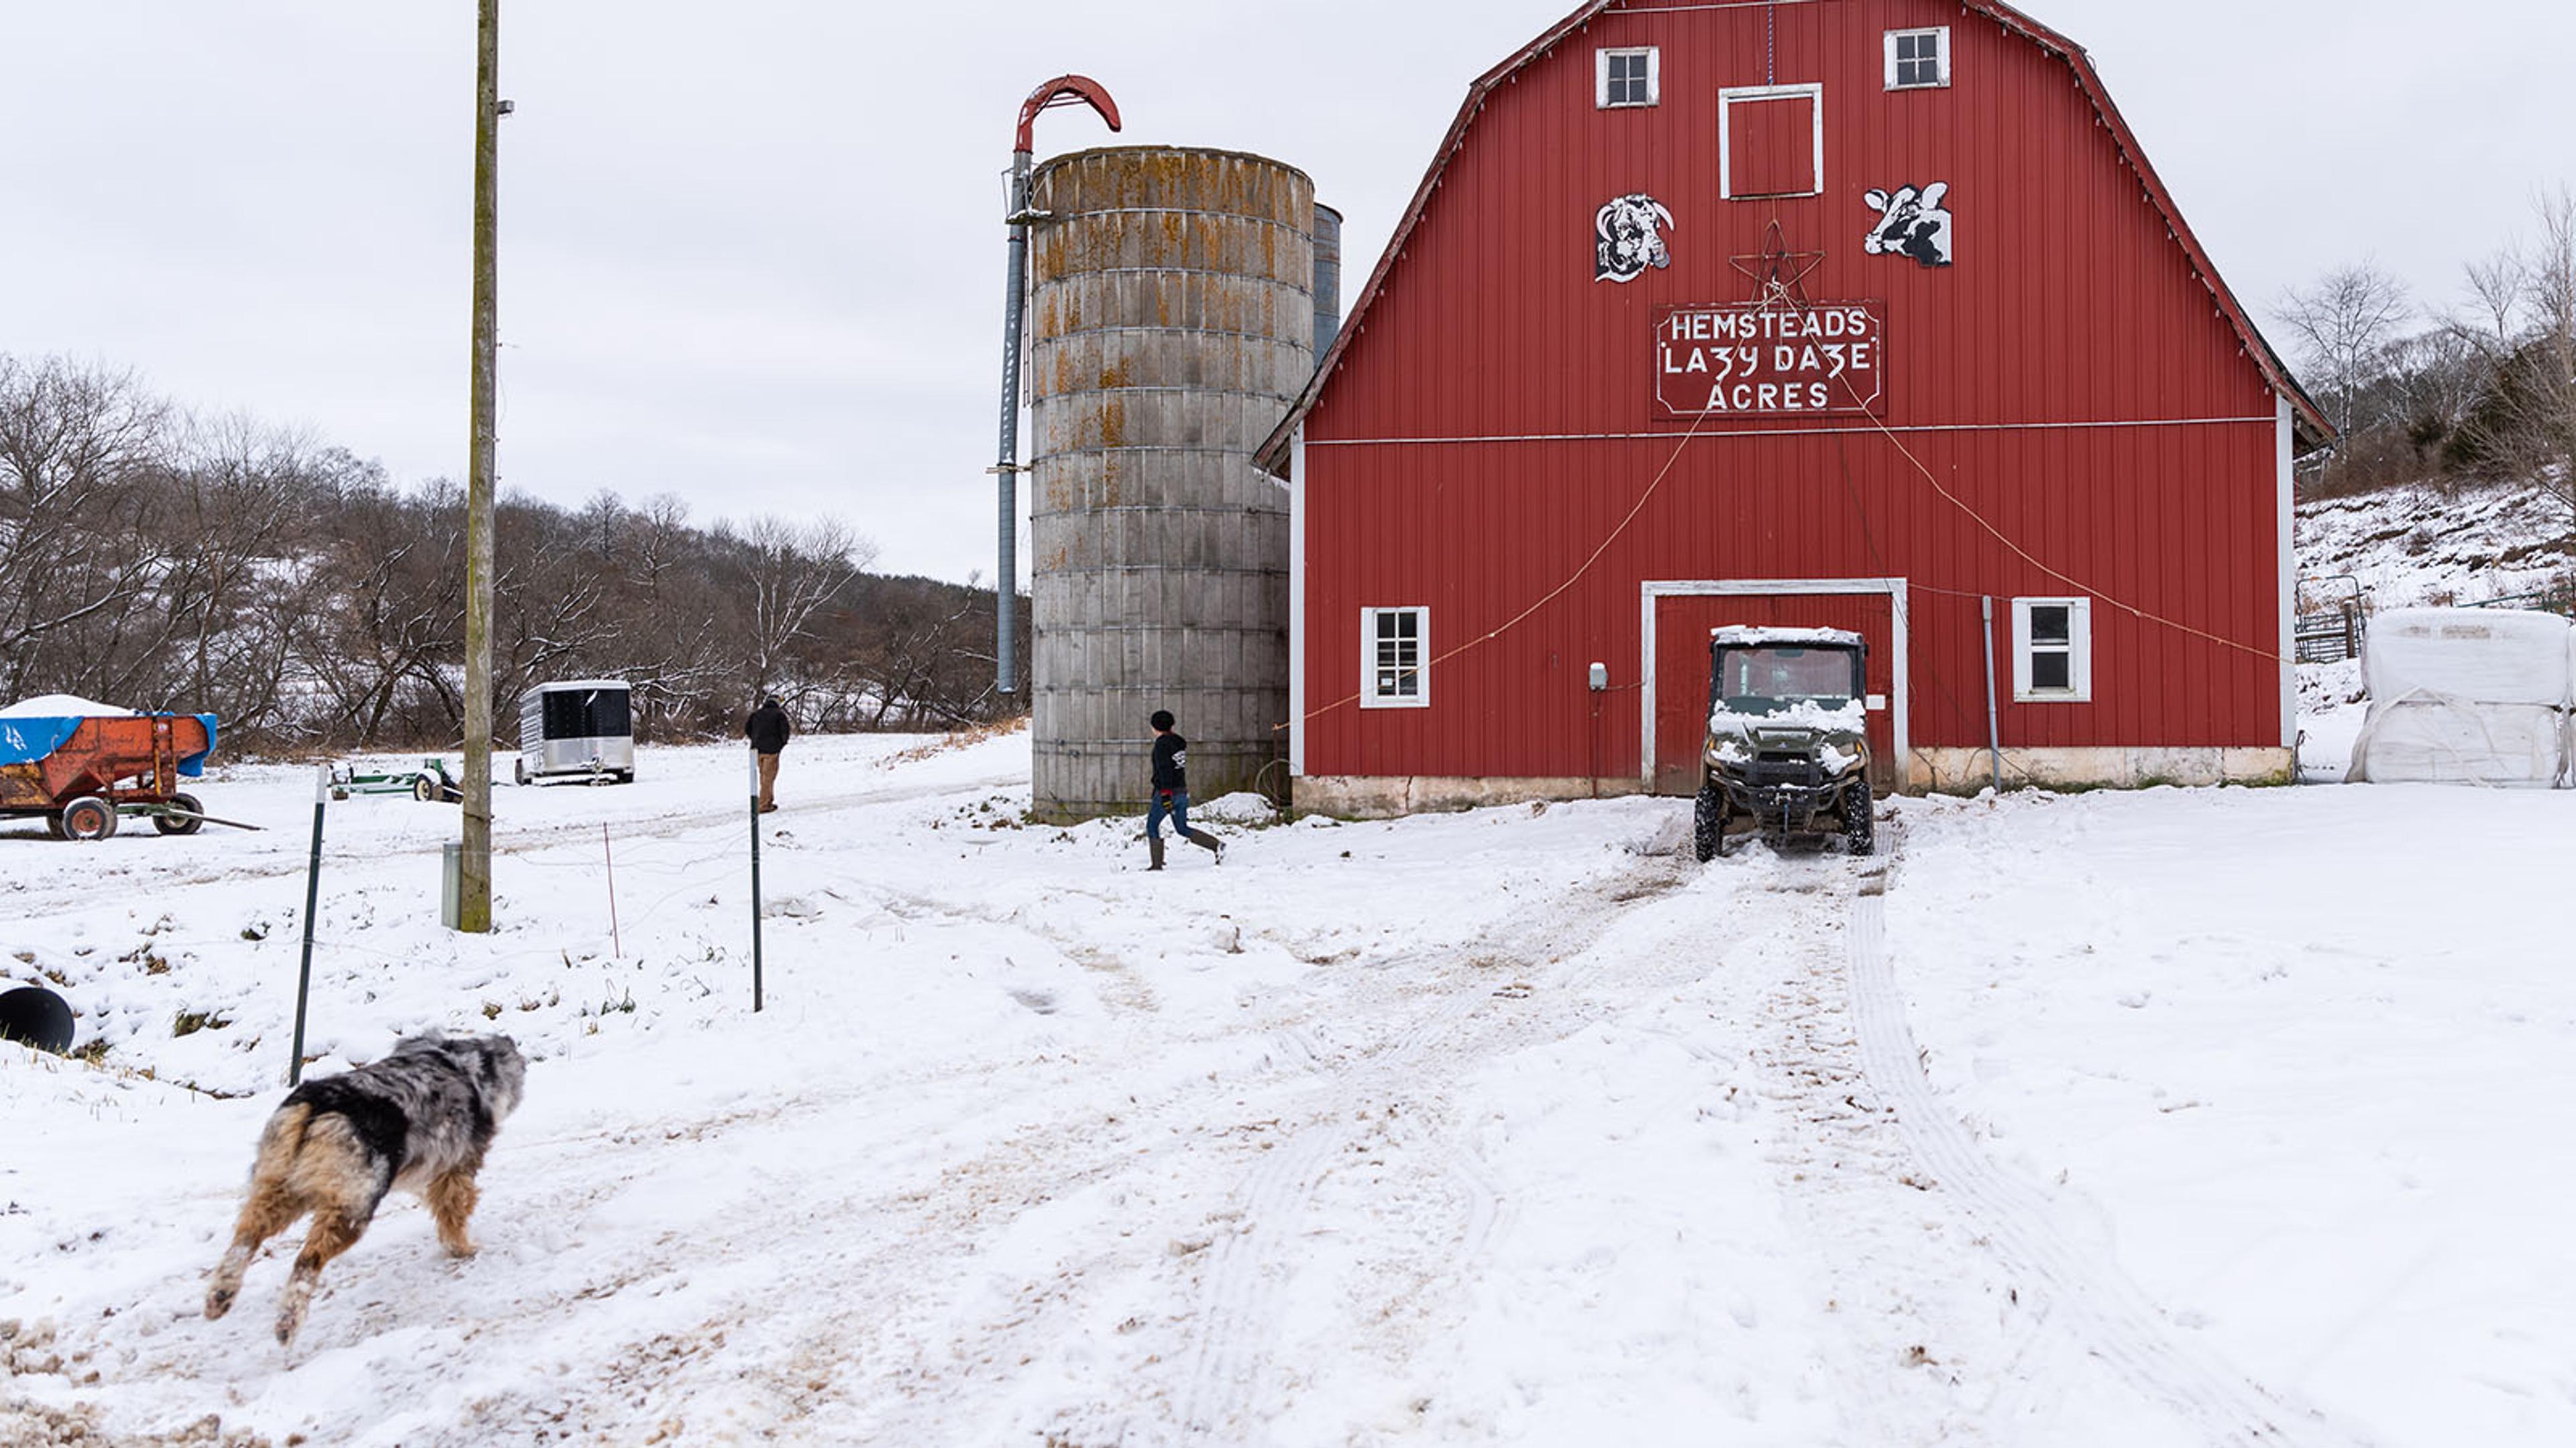 A farm dog runs through the snow to catch up to Kristina walking around the beautiful red milking parlor with a sign reading Lazy Daze Acres on the wall.